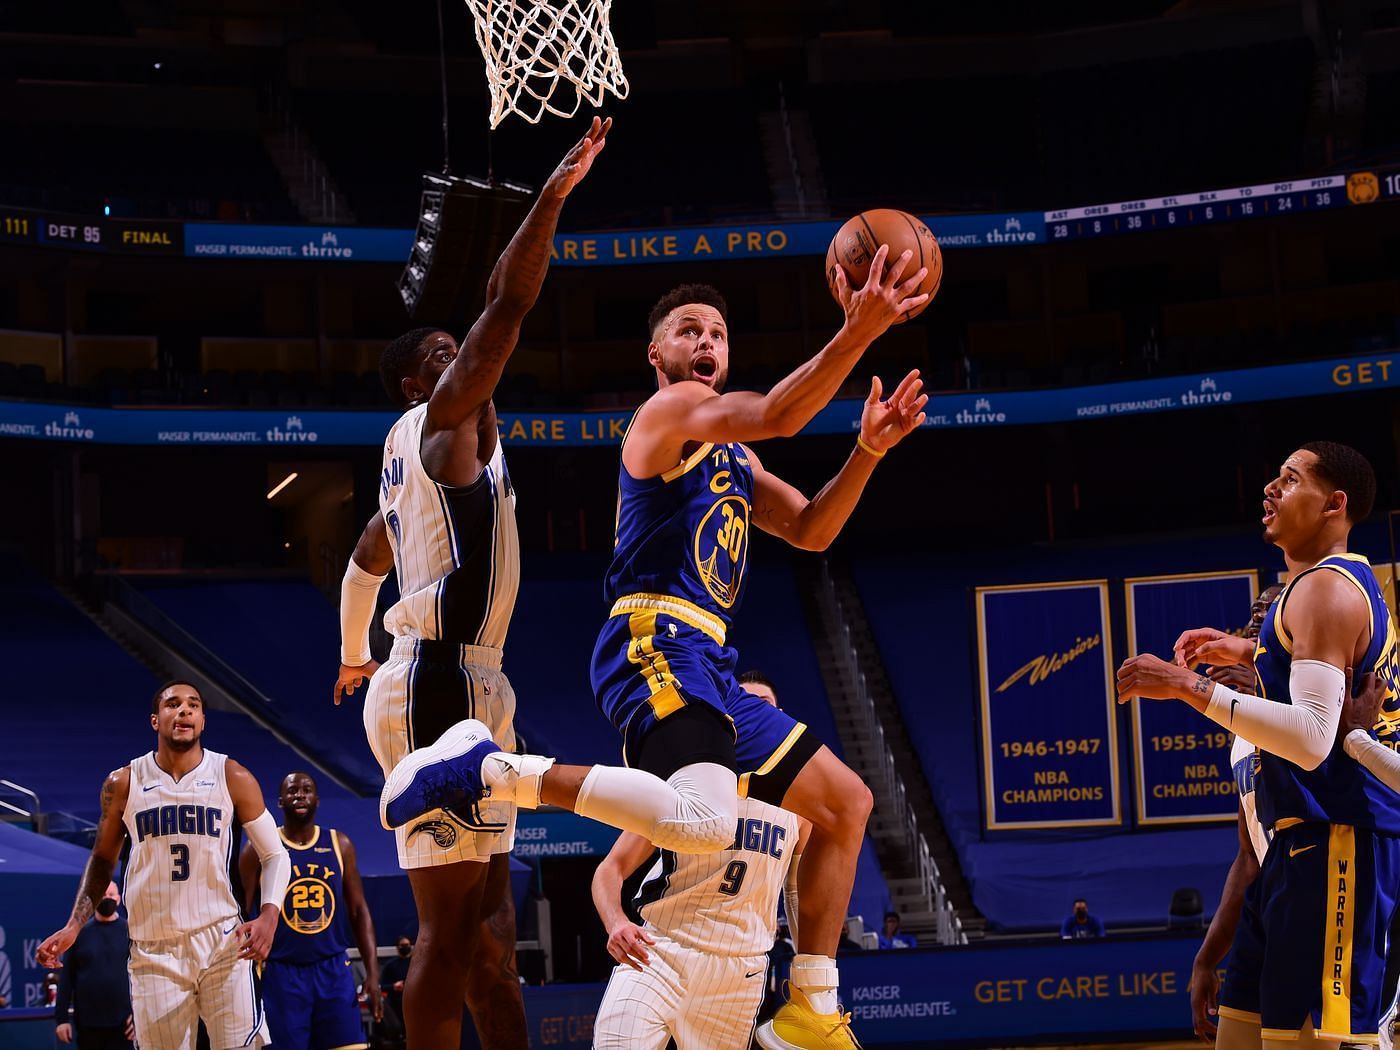 Stephen Curry of the Golden State Warriors scores against the Orlando Magic